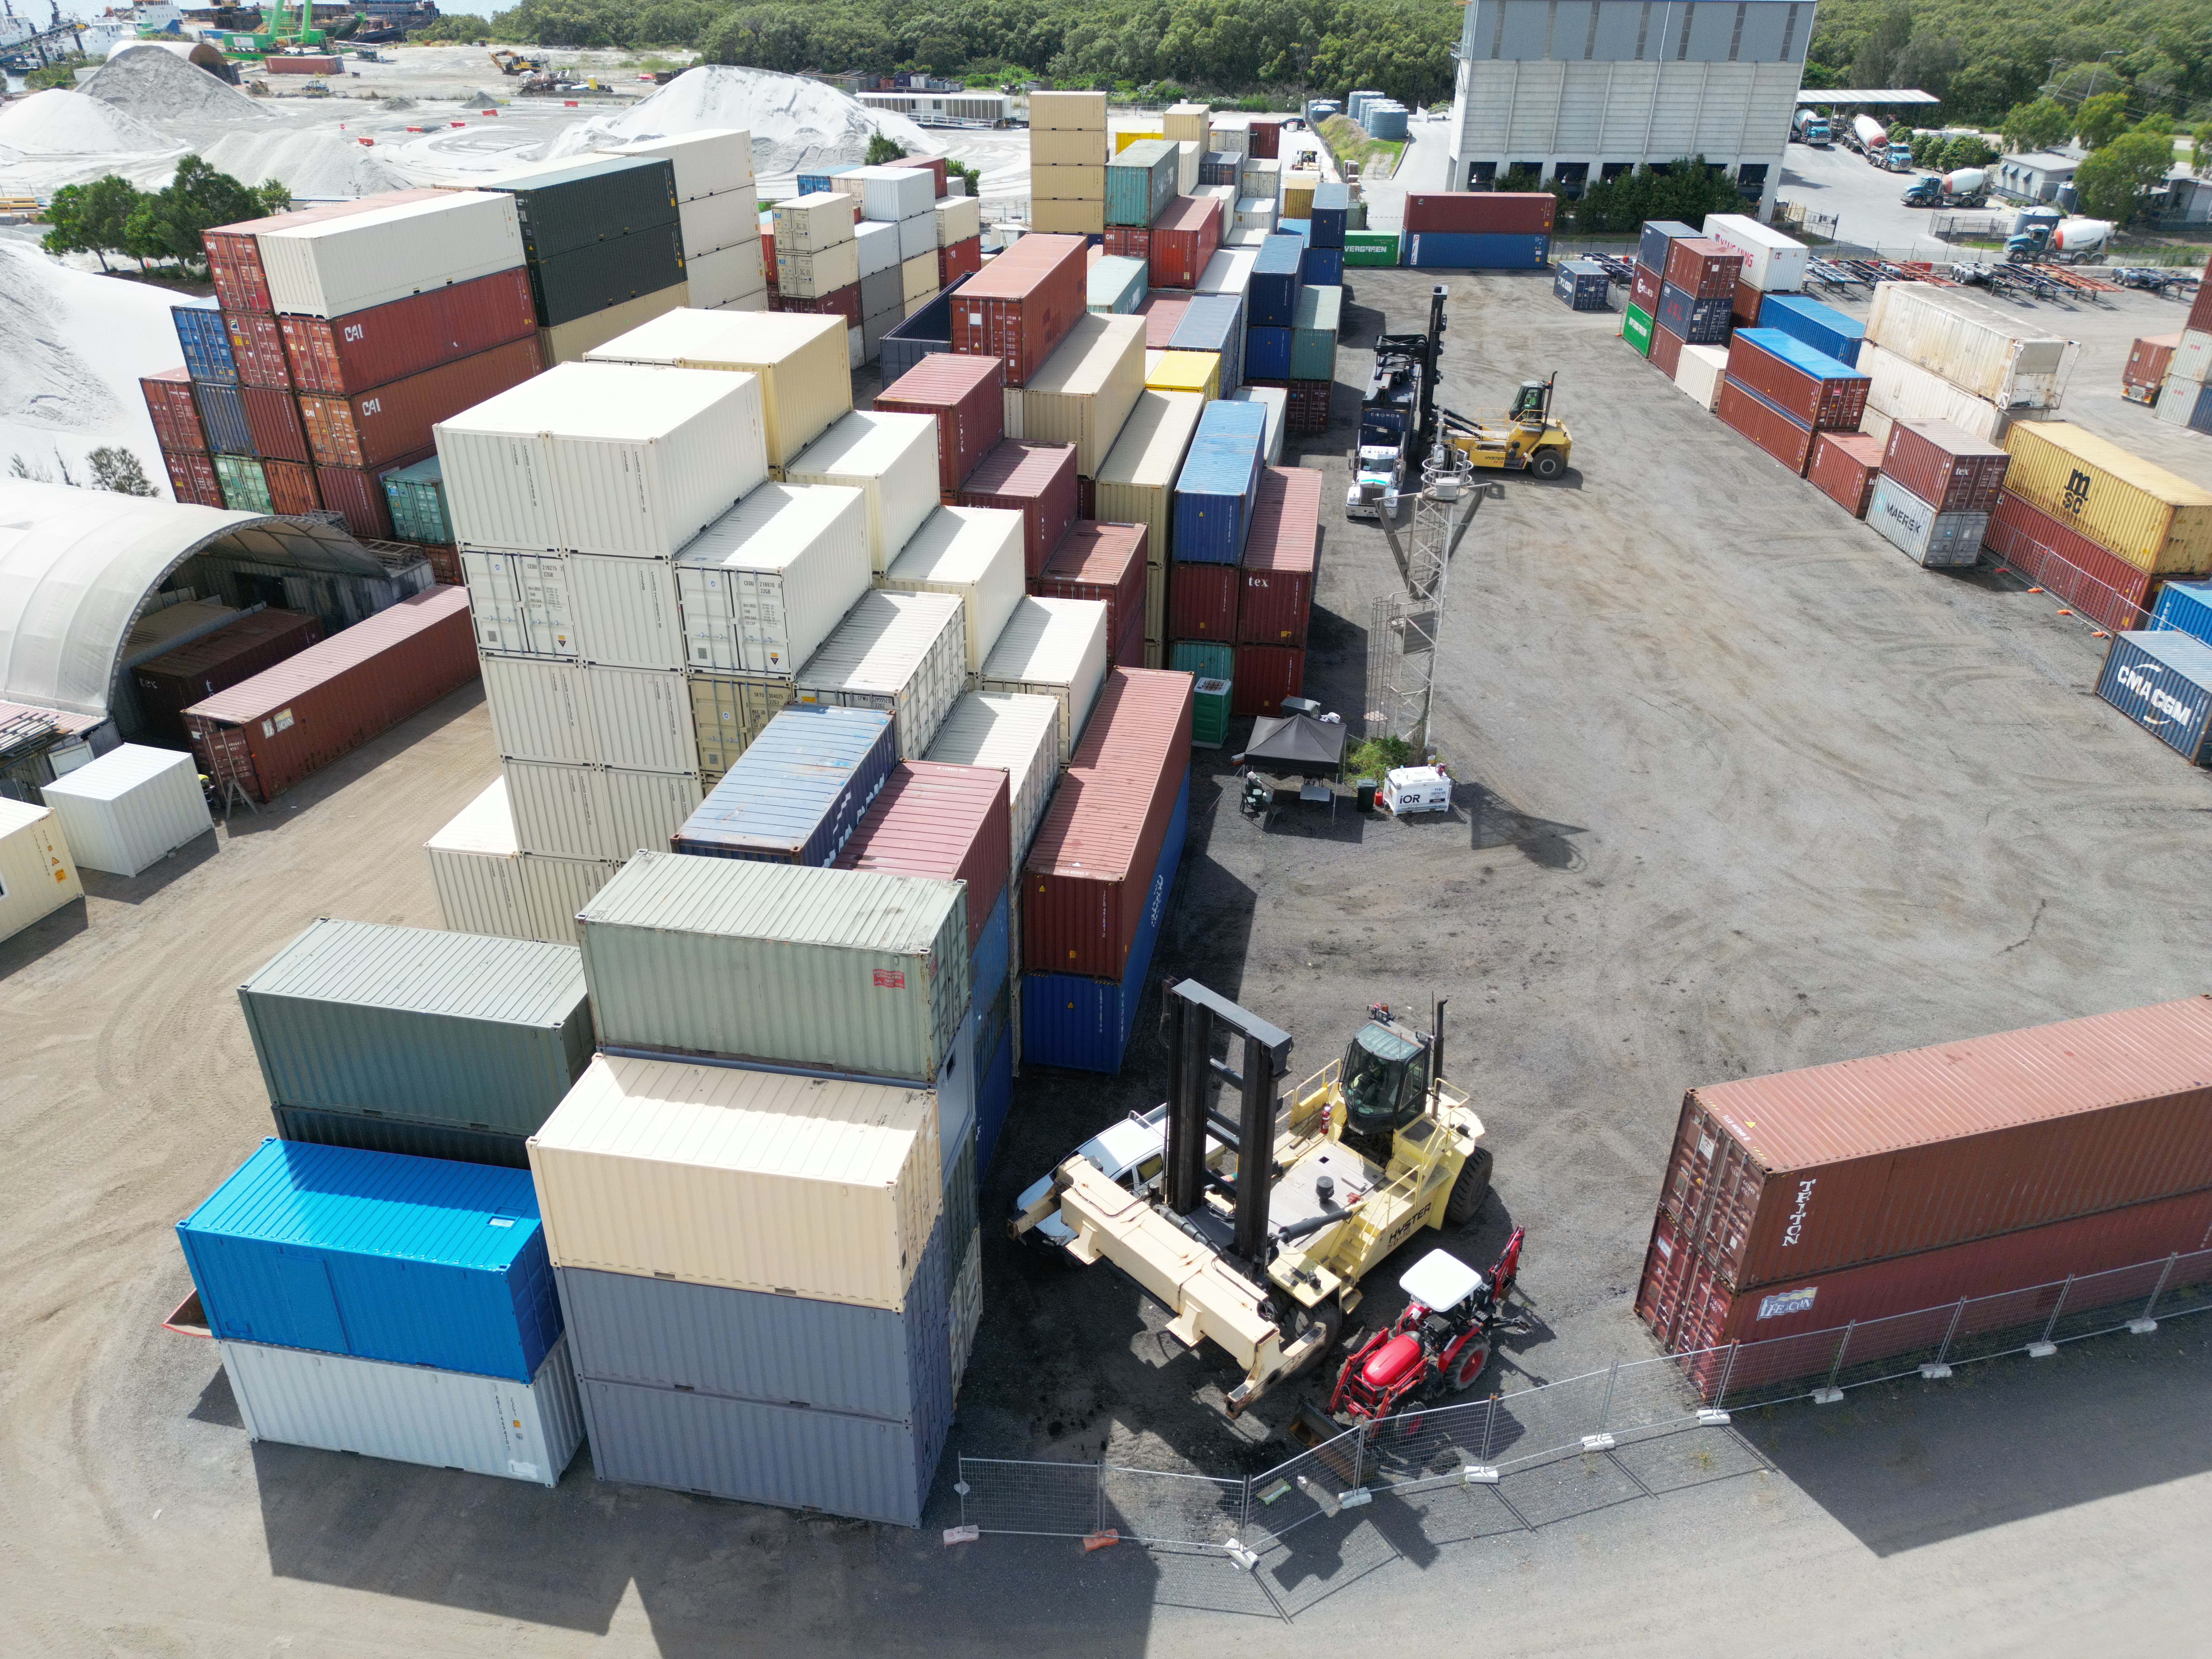 Image of shipping containers in Gladstone